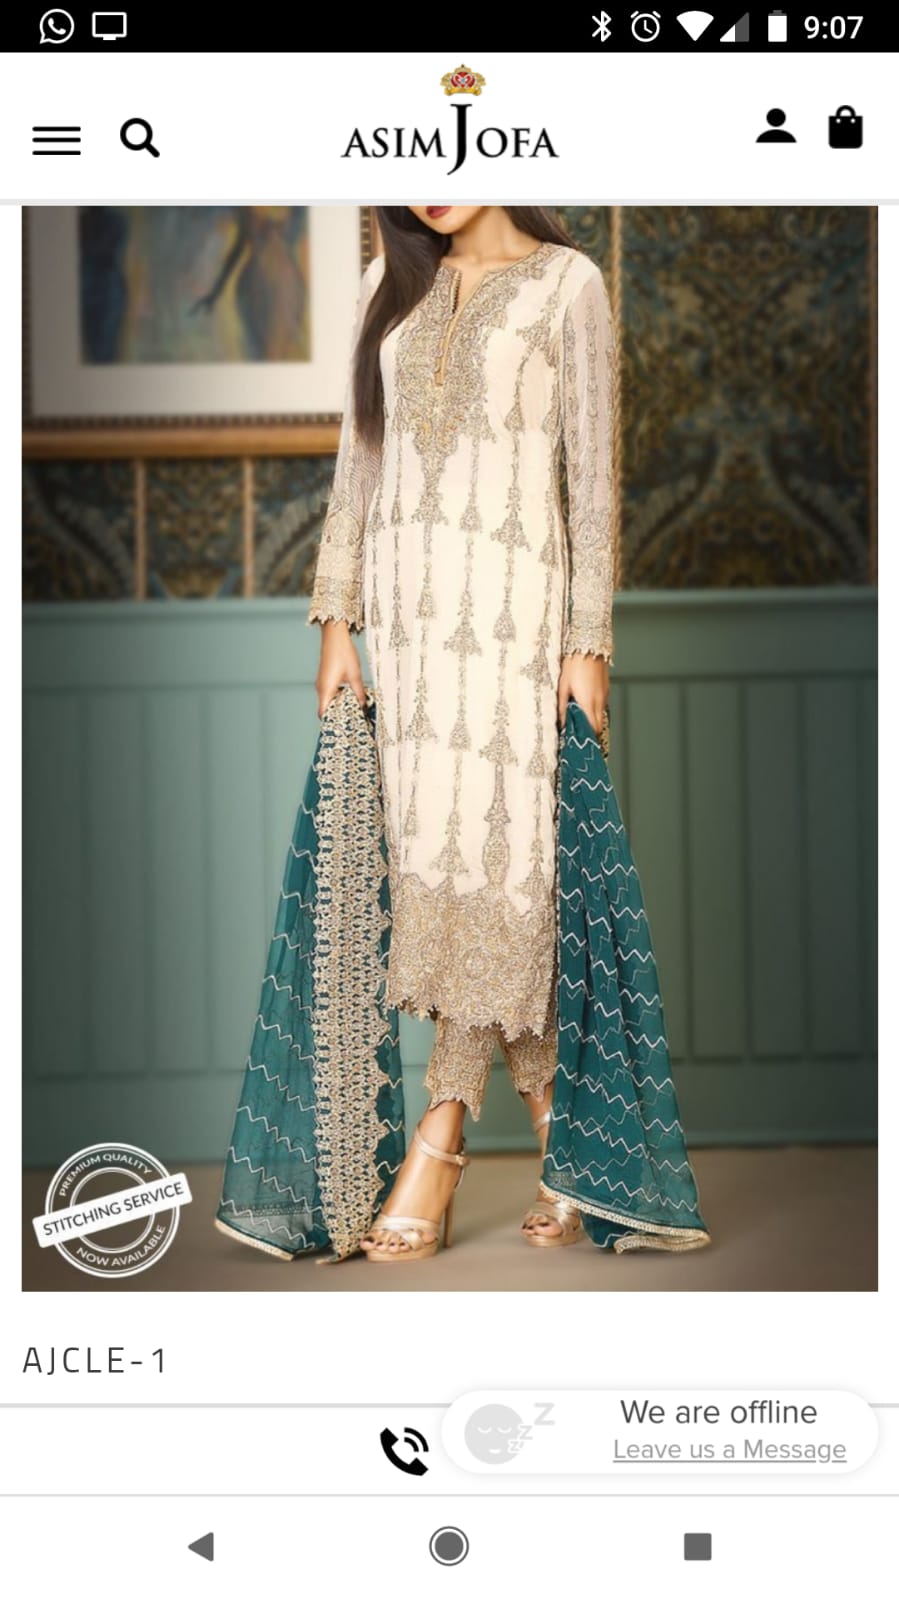 Beautiful Chiffon Dress by Asim Jofa in Offwhite and Sea Green Color ...